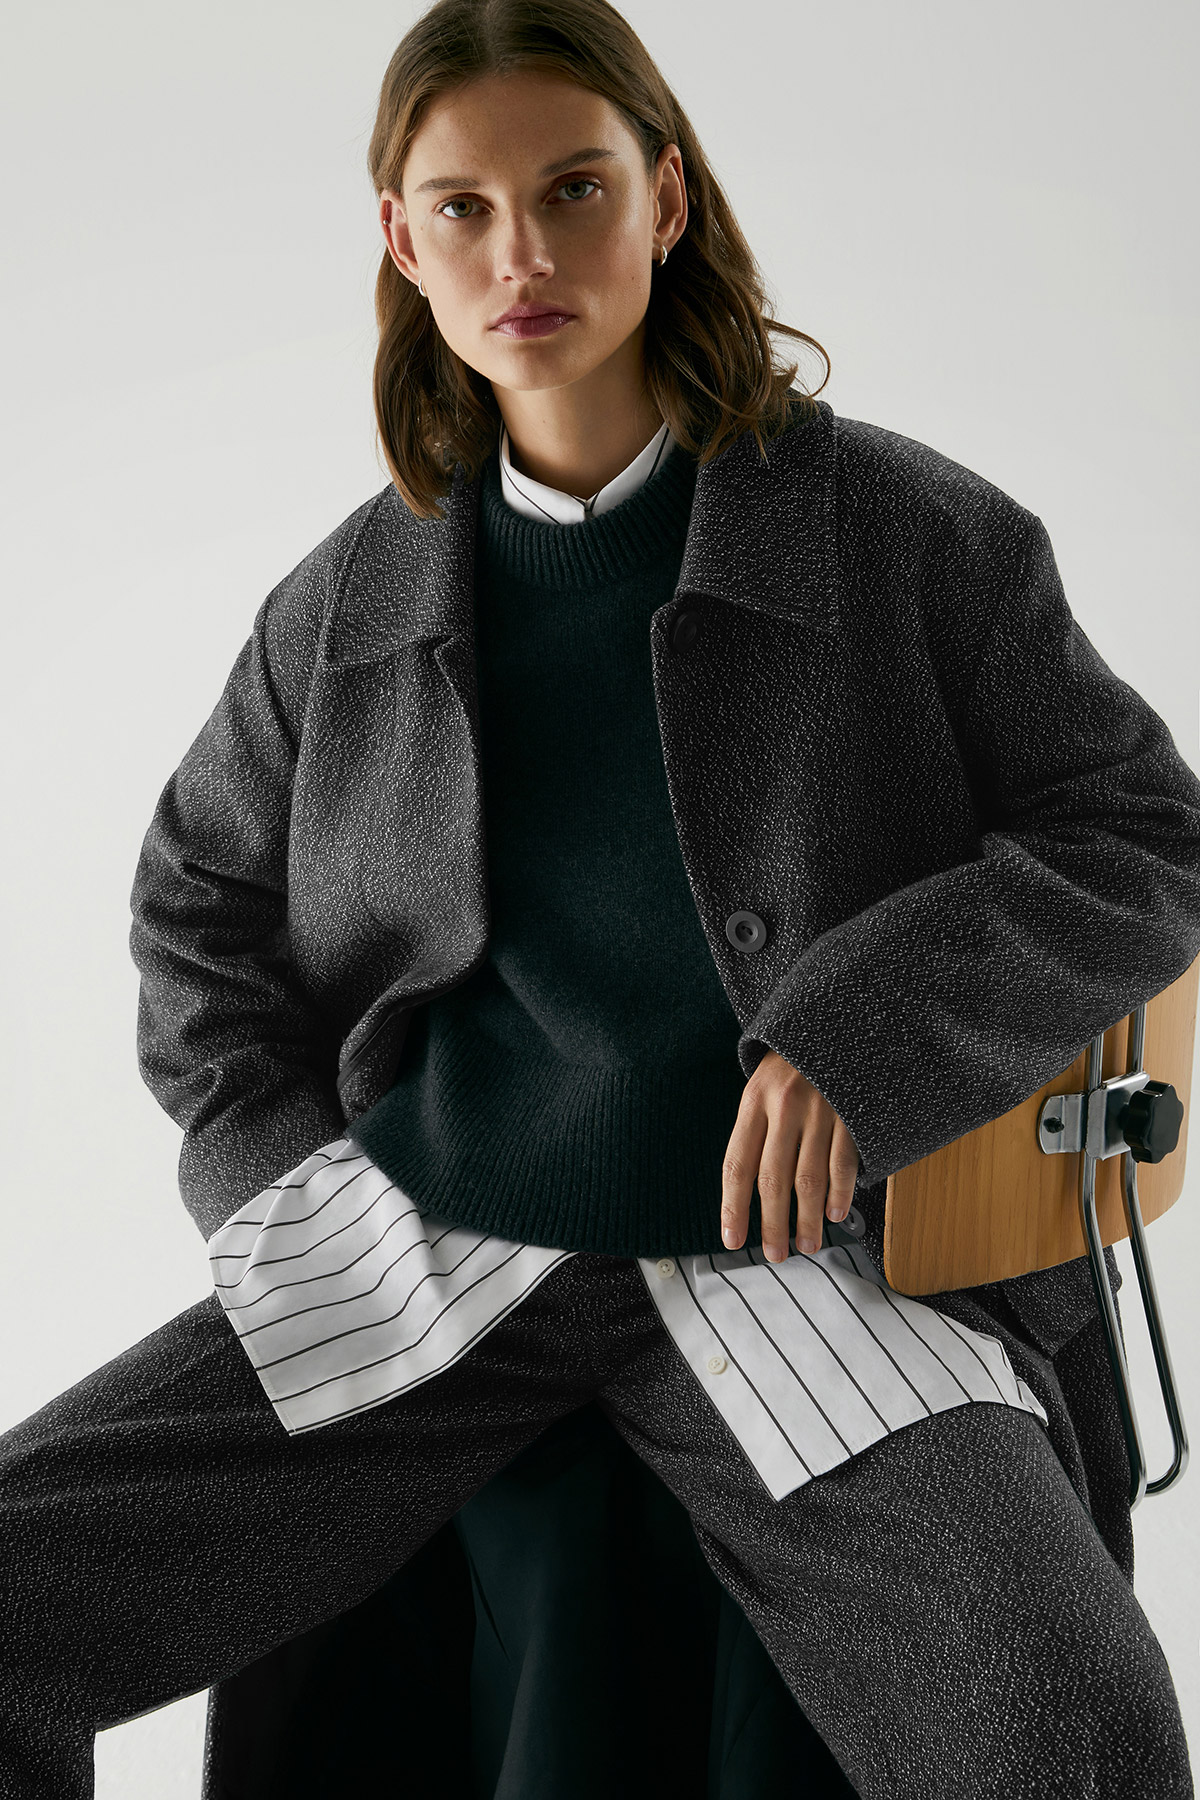 Consider our latest collection of fuzzy knits and relaxed separates the solution to cold-weather dressing. Sit back, layer up and stay warm...​ Shop women's coats & jackets: festivalwalk